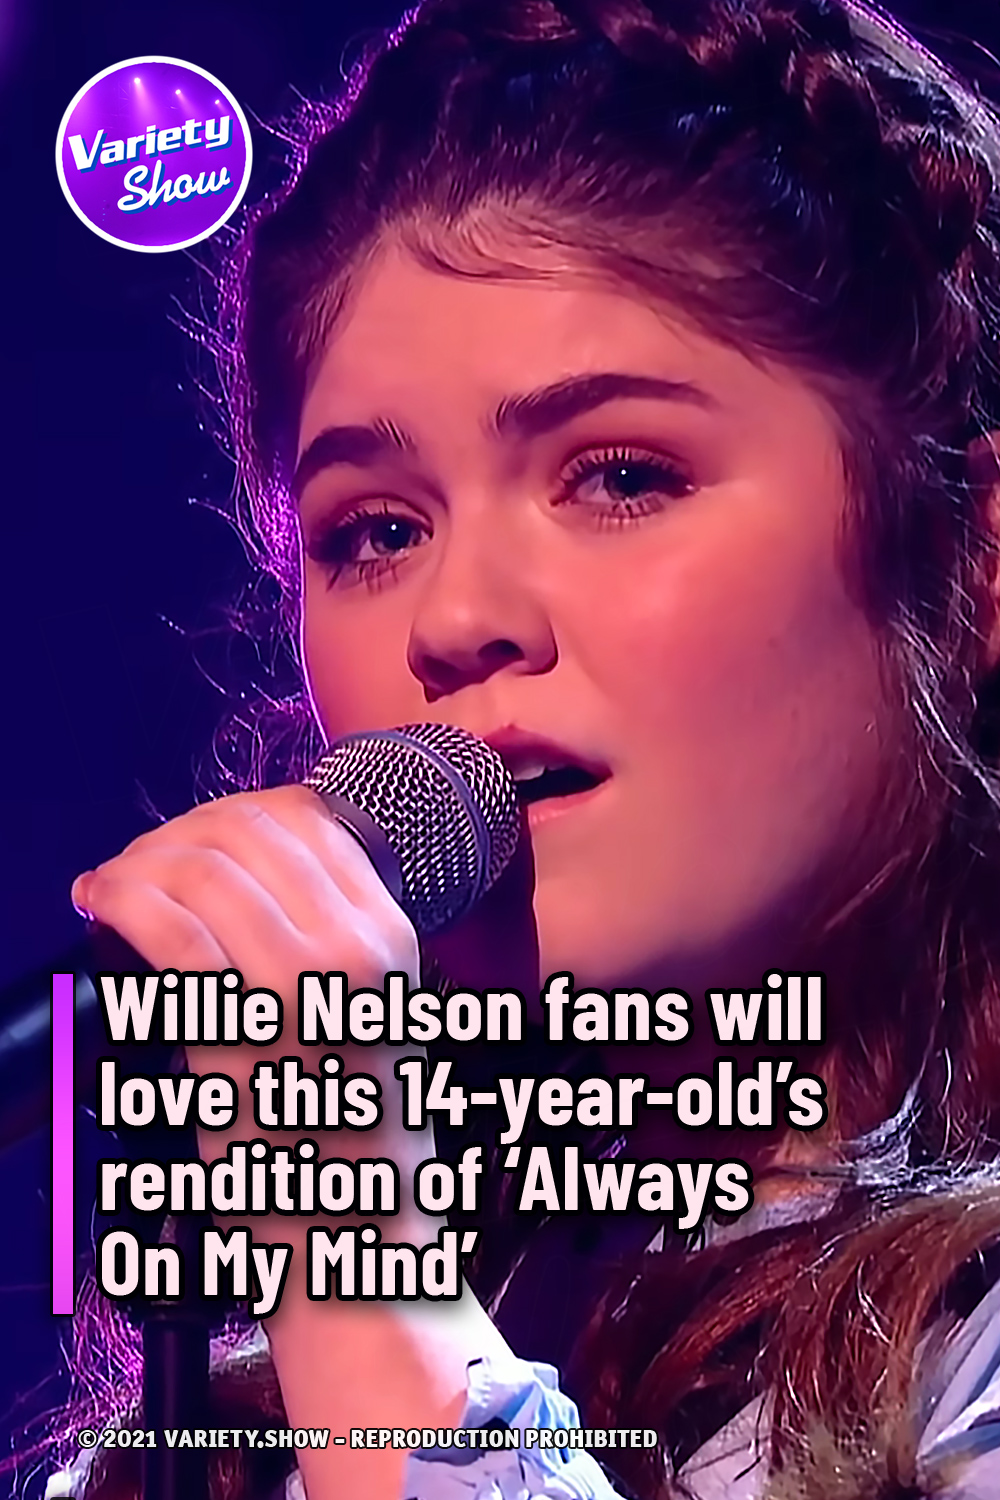 Willie Nelson fans will love this 14-year-old’s rendition of ‘Always On My Mind’